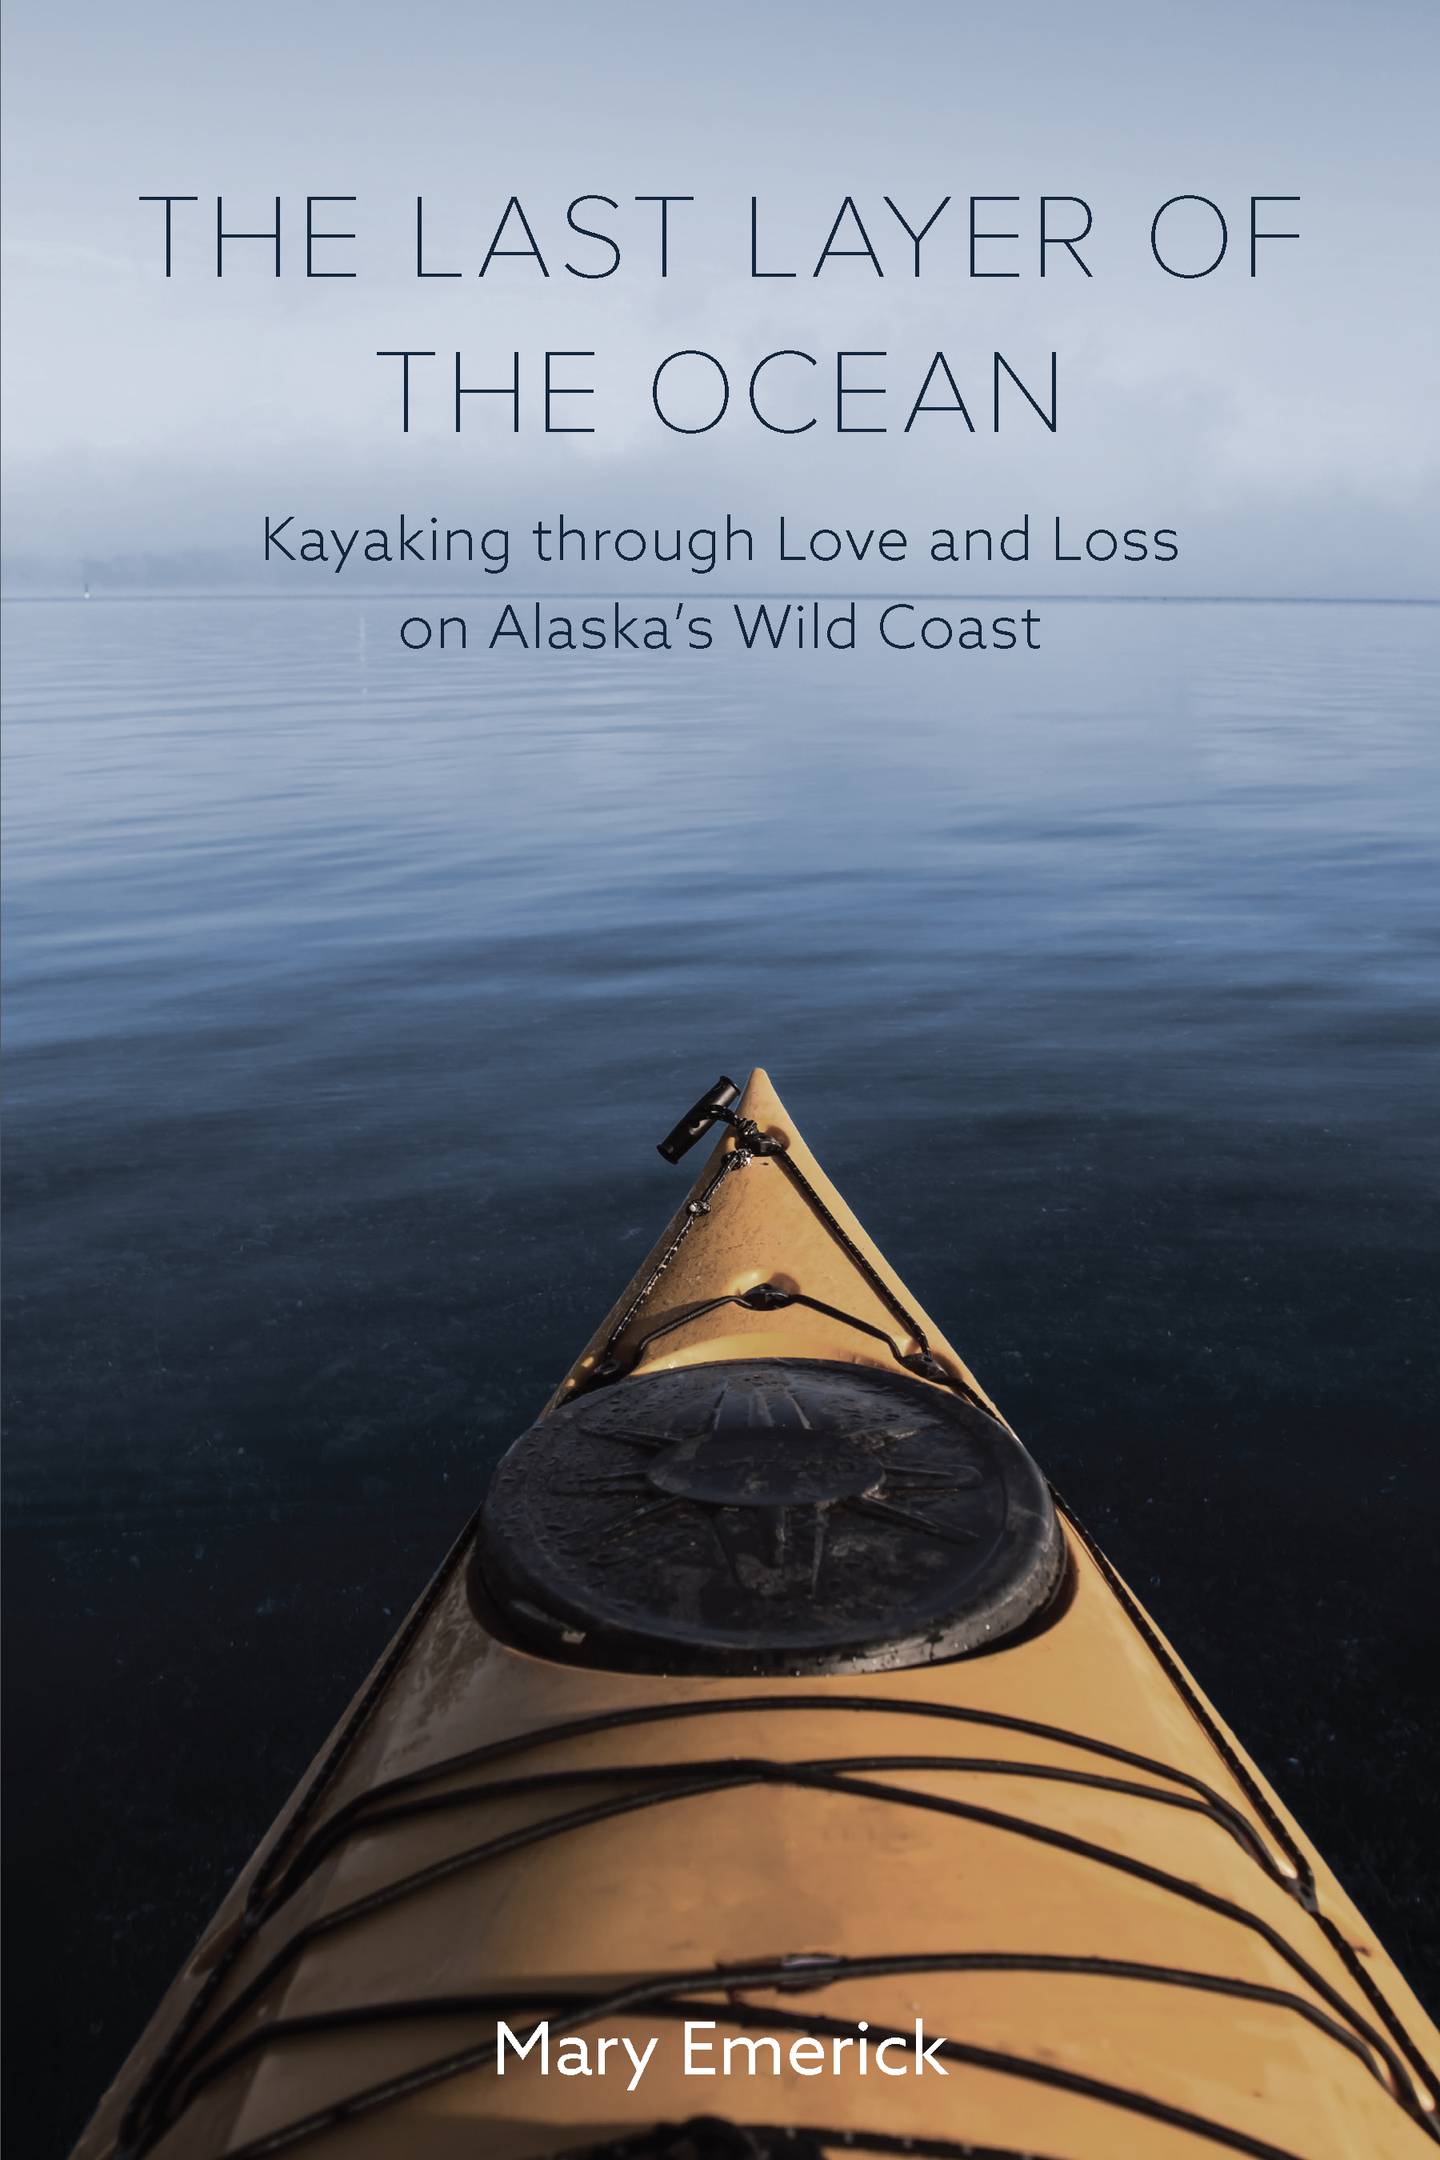 “The Last Layer of the Ocean: Kayaking through Love and Loss on Alaska’s Wild Coast,” by Mary Emerick